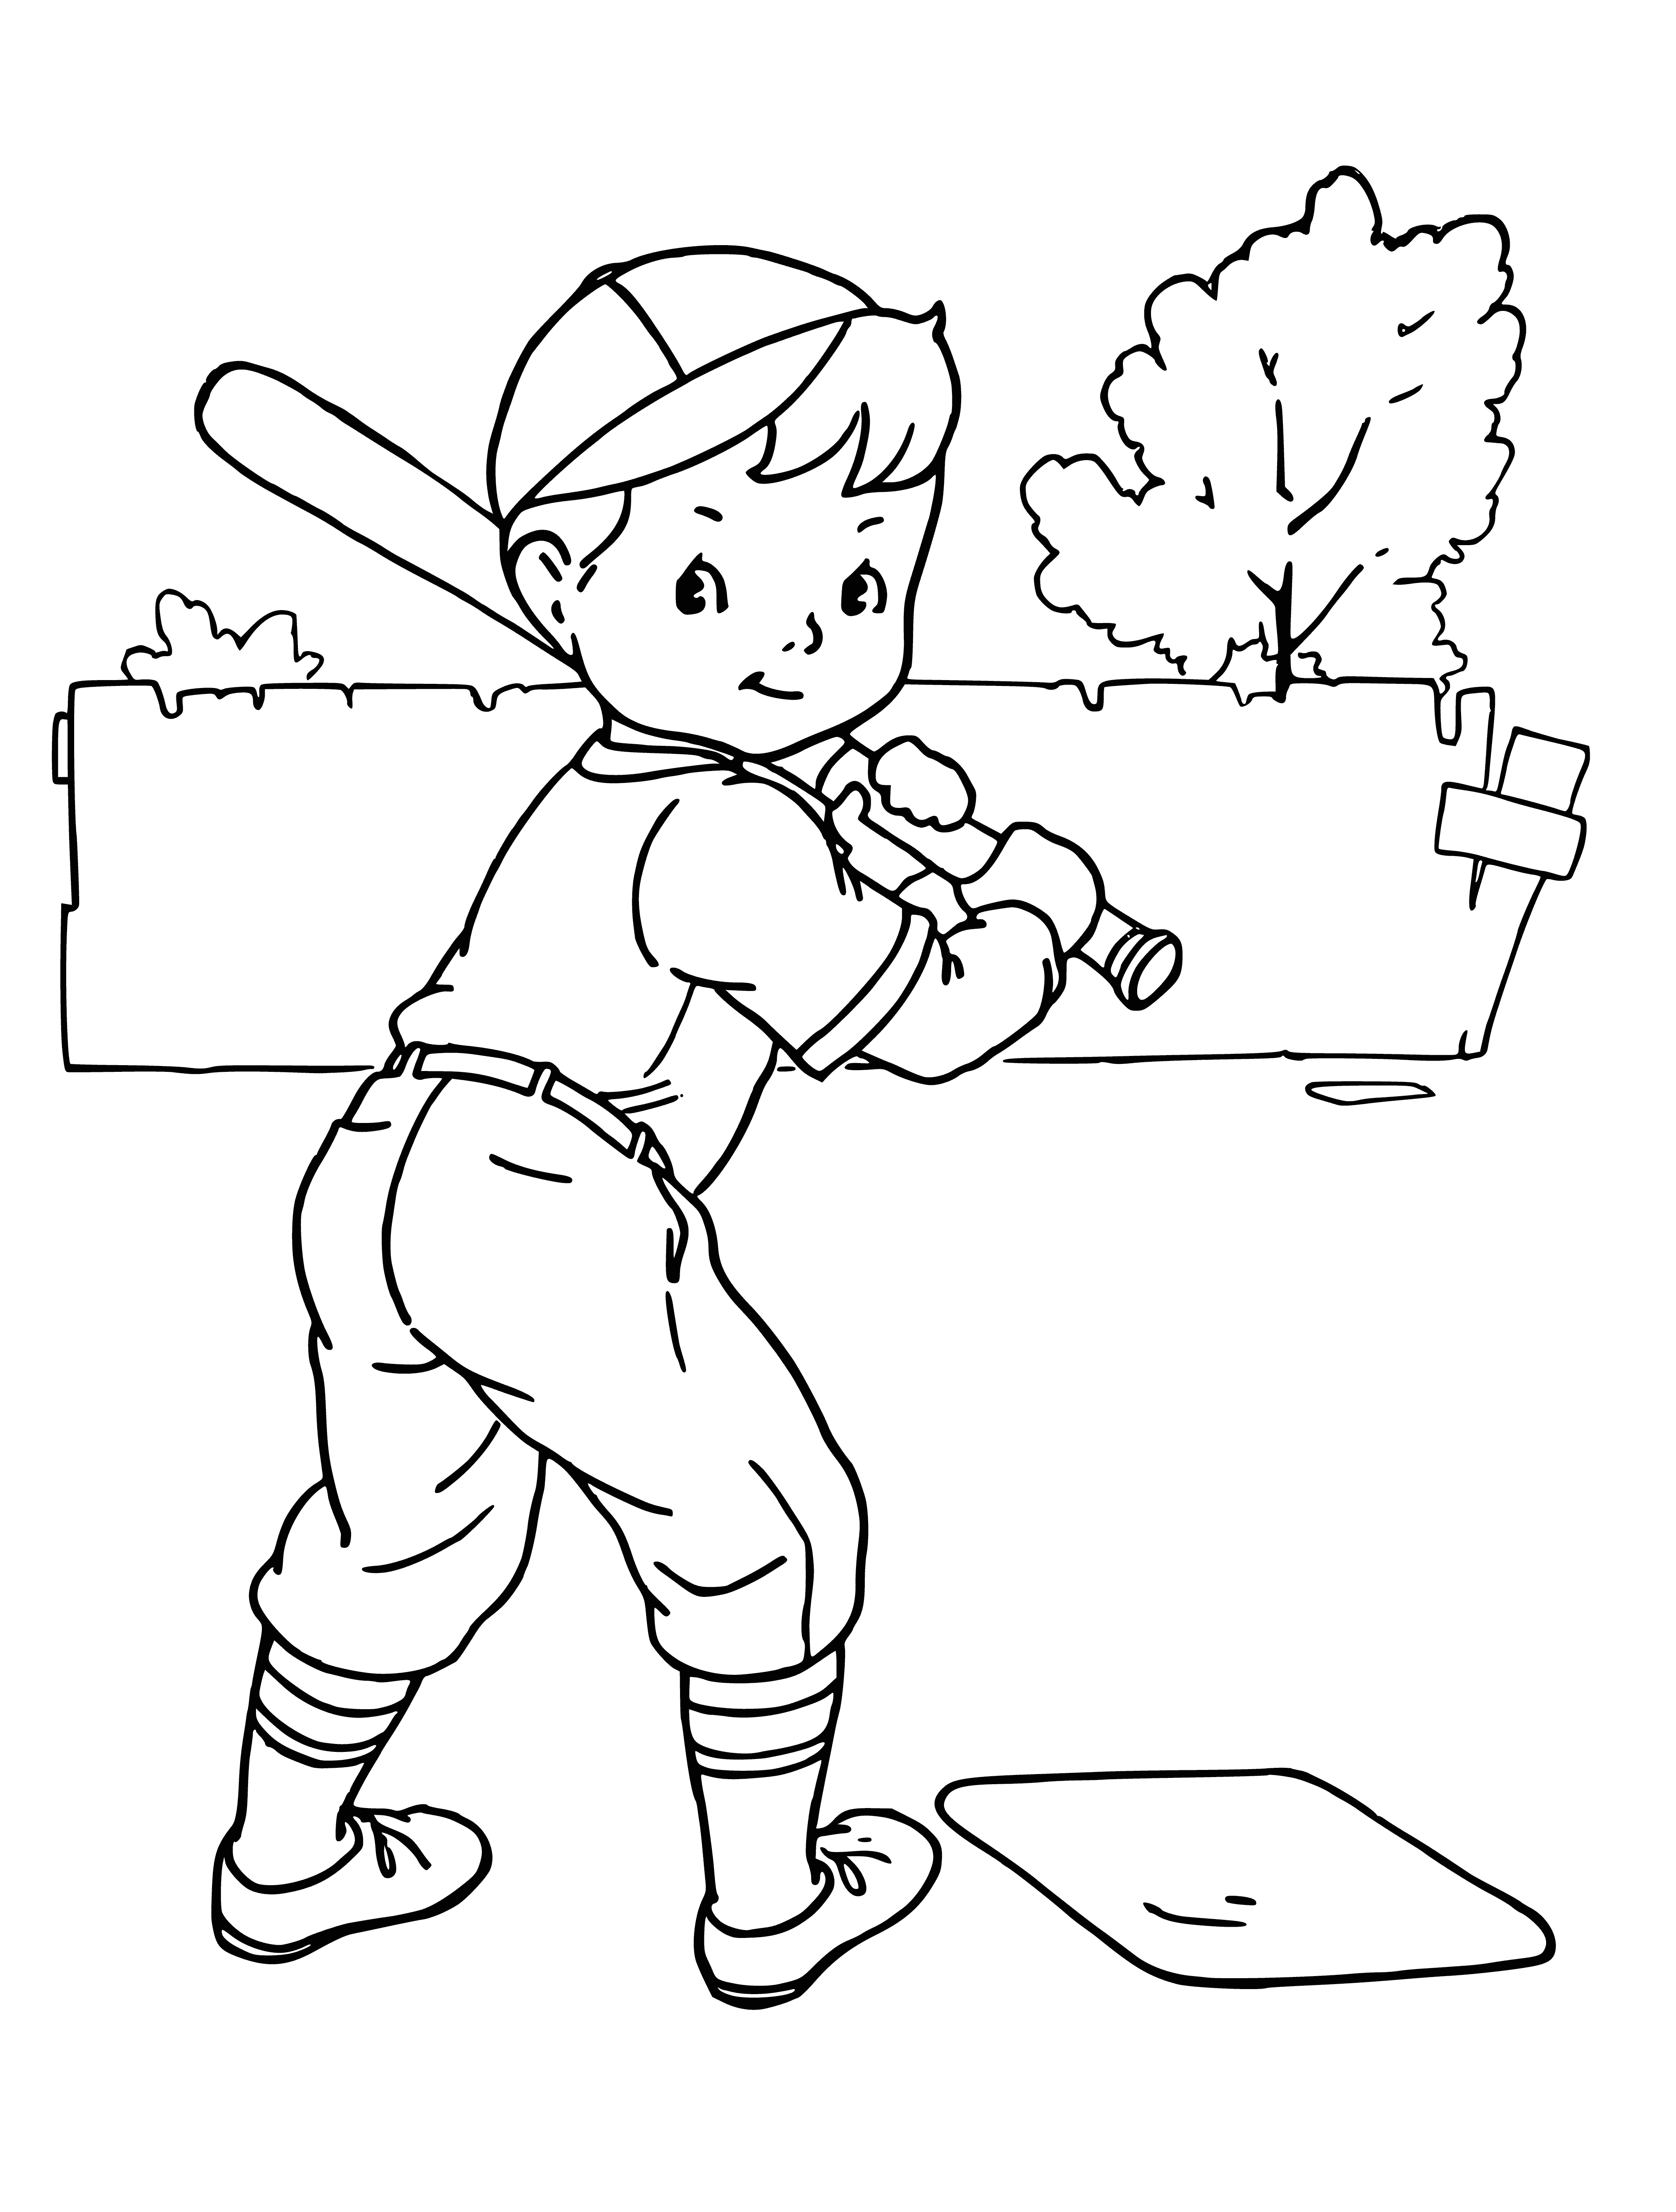 coloring page: Coloring page has baseball diamond w/ game taking place, grass, batters, outfielders, infielders & catcher behind batter. #baseball #coloring